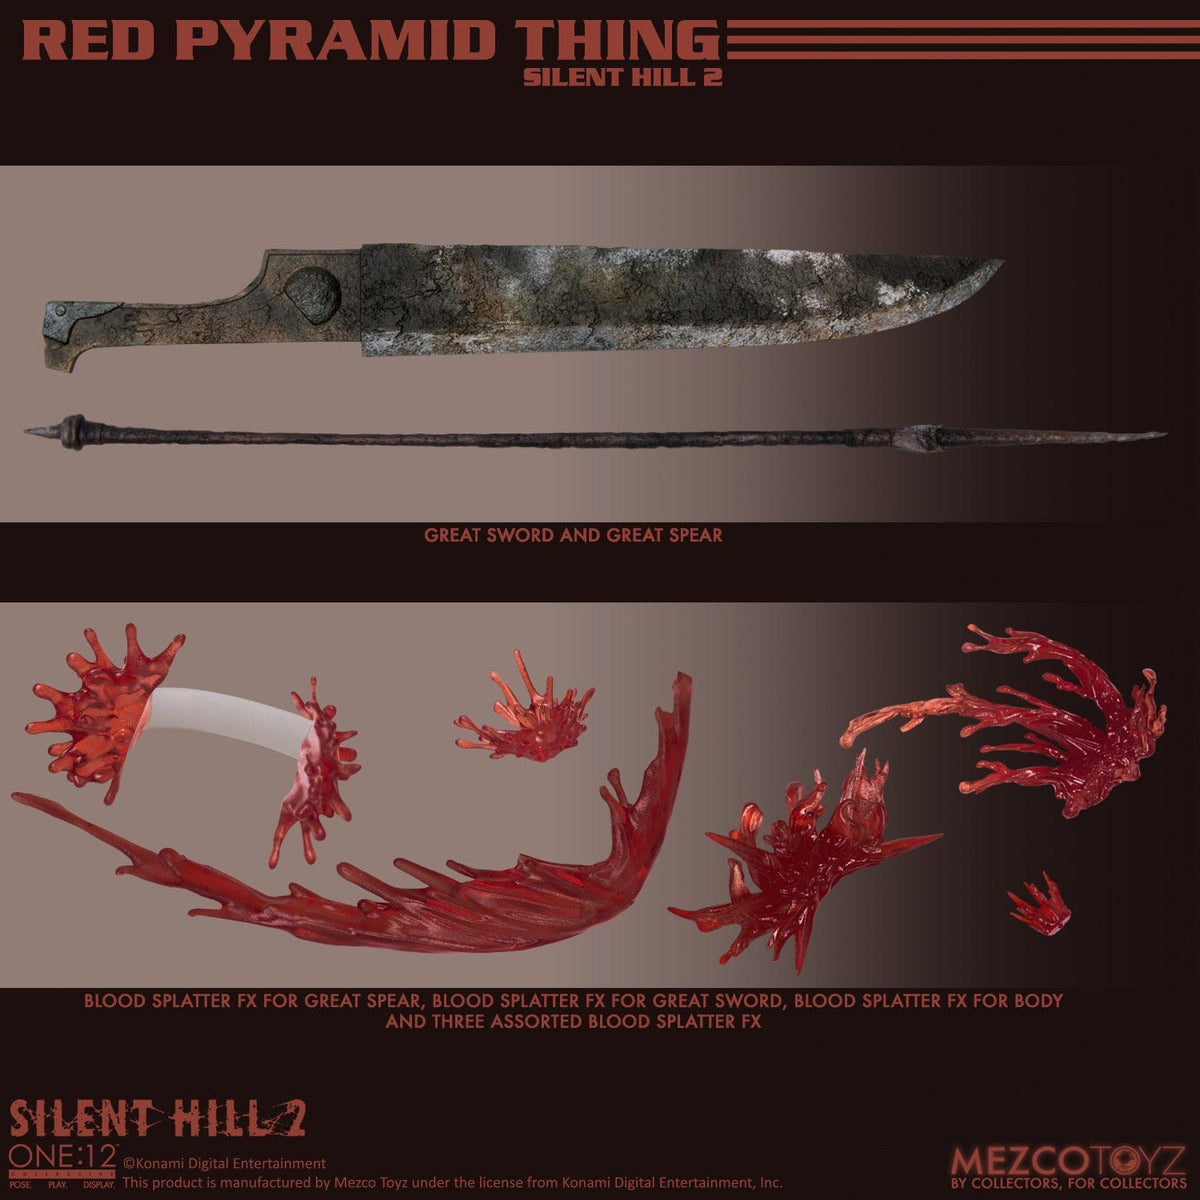 One-12 Collective: Silent Hill 2 - Red Pyramid Thing